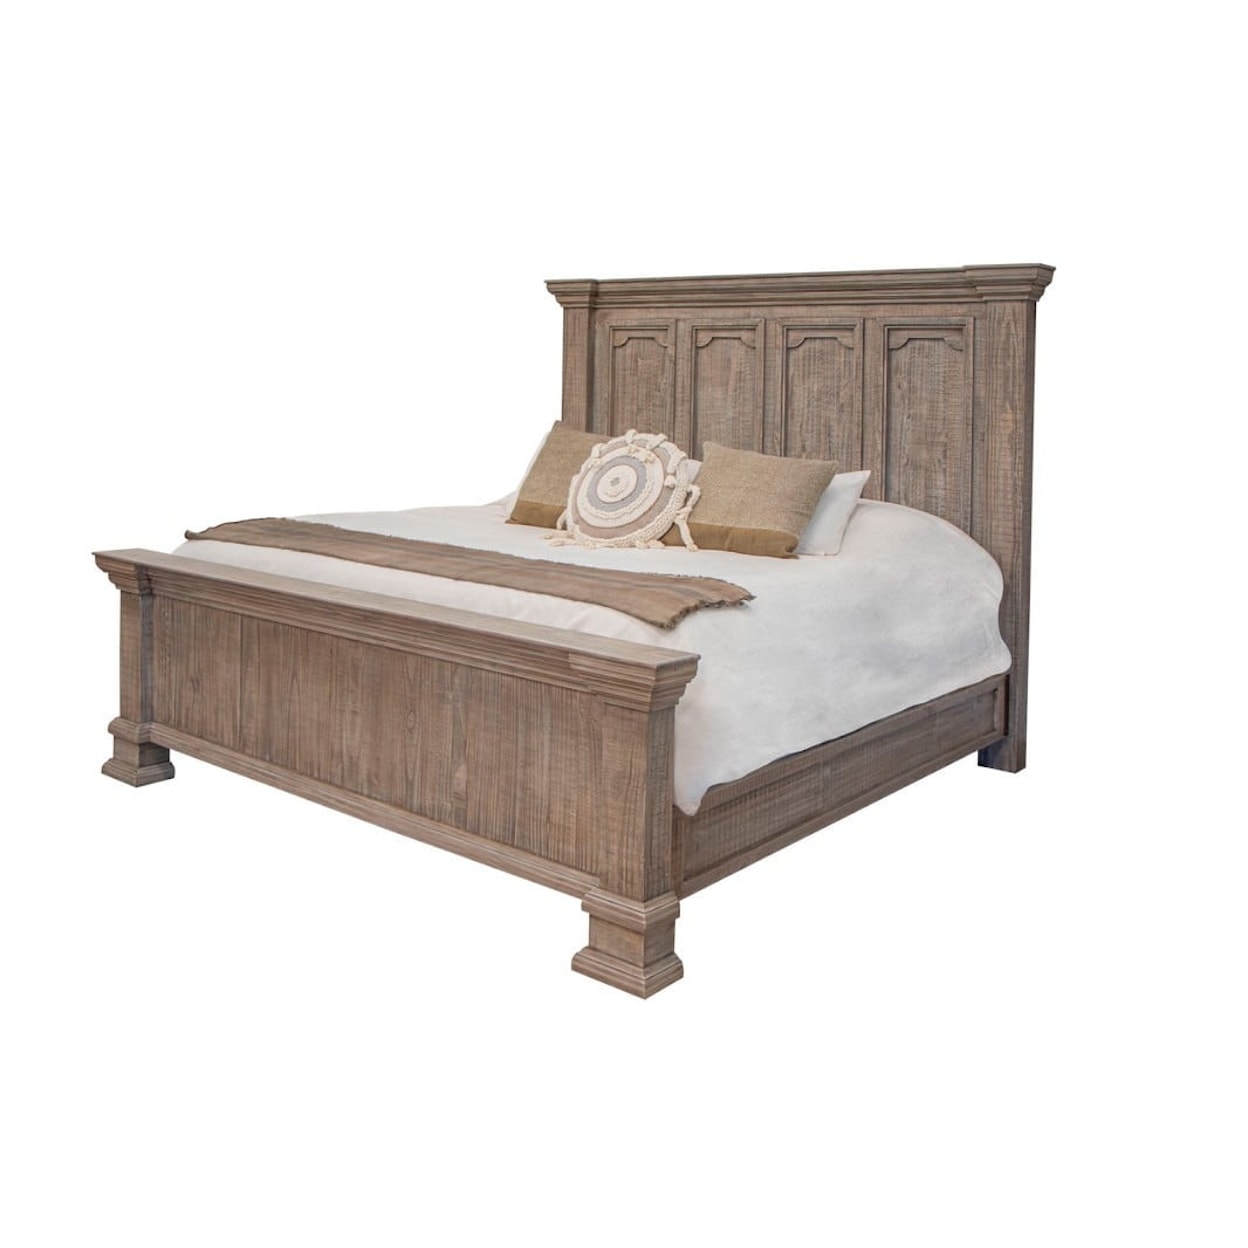 VFM Signature Tower Tower King Bed